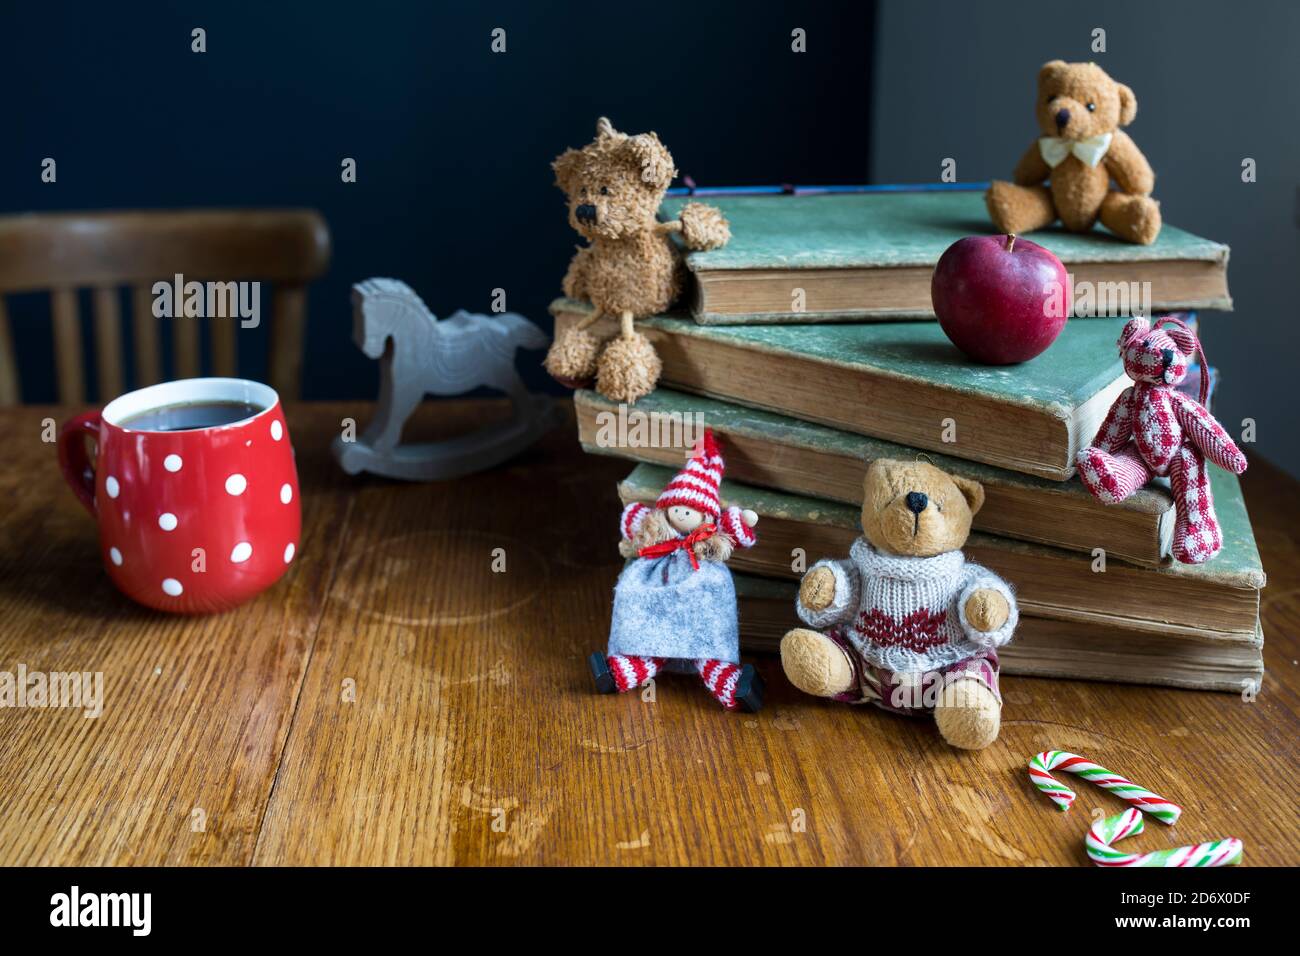 A Christmas doll and bears sit on a stack of old books. Copy space. Selective focus. Red cup with white polka dots with tea. Stock Photo